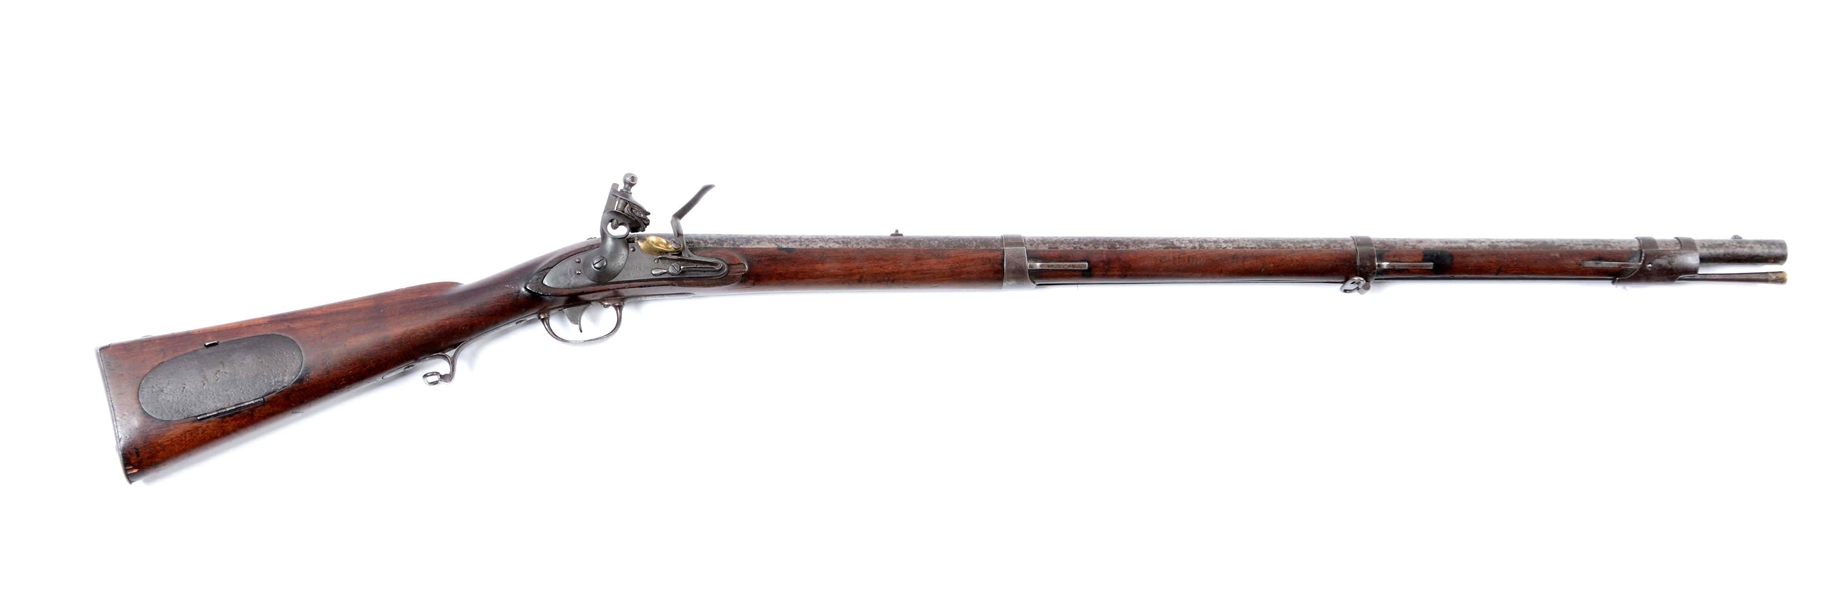 (A) U.S. MODEL 1817 FLINTLOCK "COMMON RIFLE" BY S. NORTH DATED 1824.